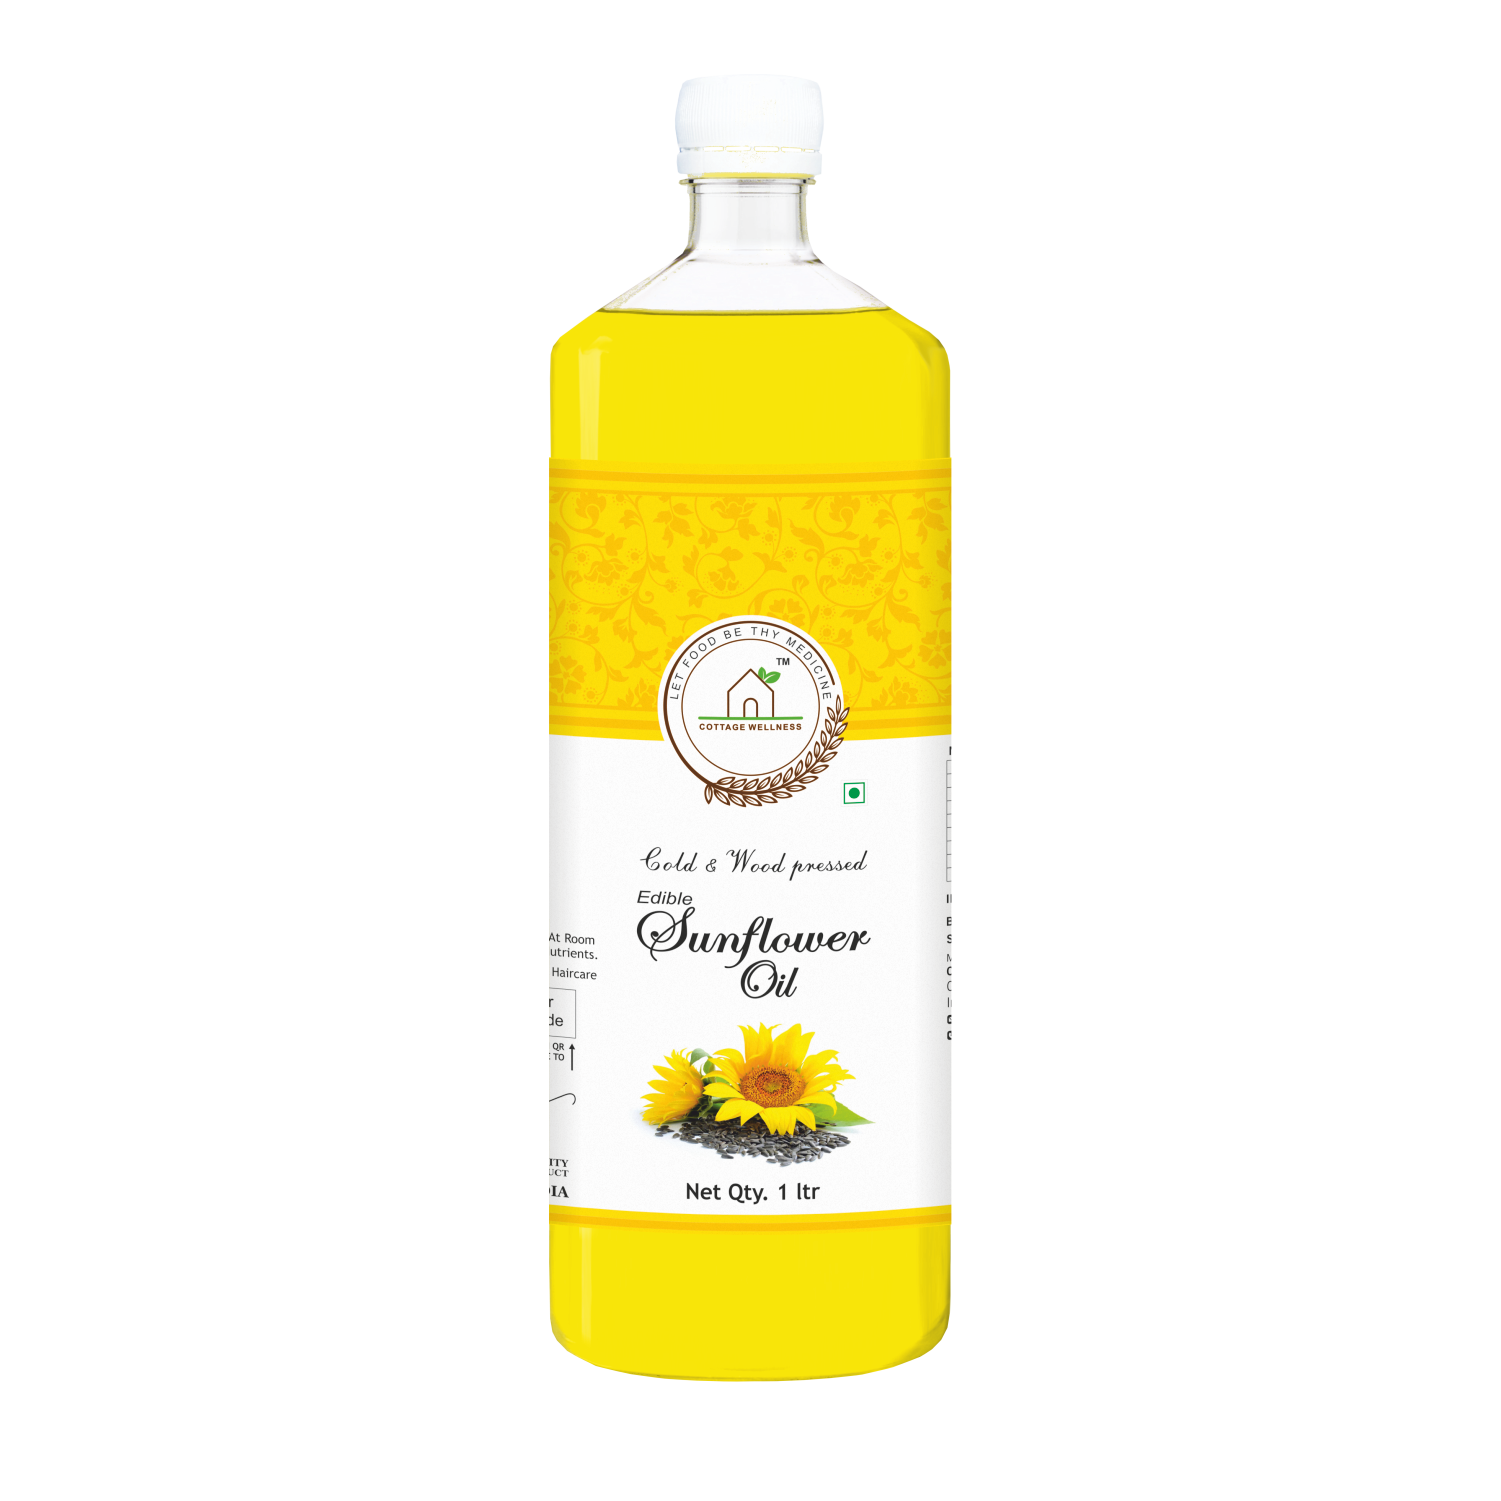 Cottage Wellness Sunflower Oil Cold and Wood Pressed Edible 1Litre - hfnl!fe